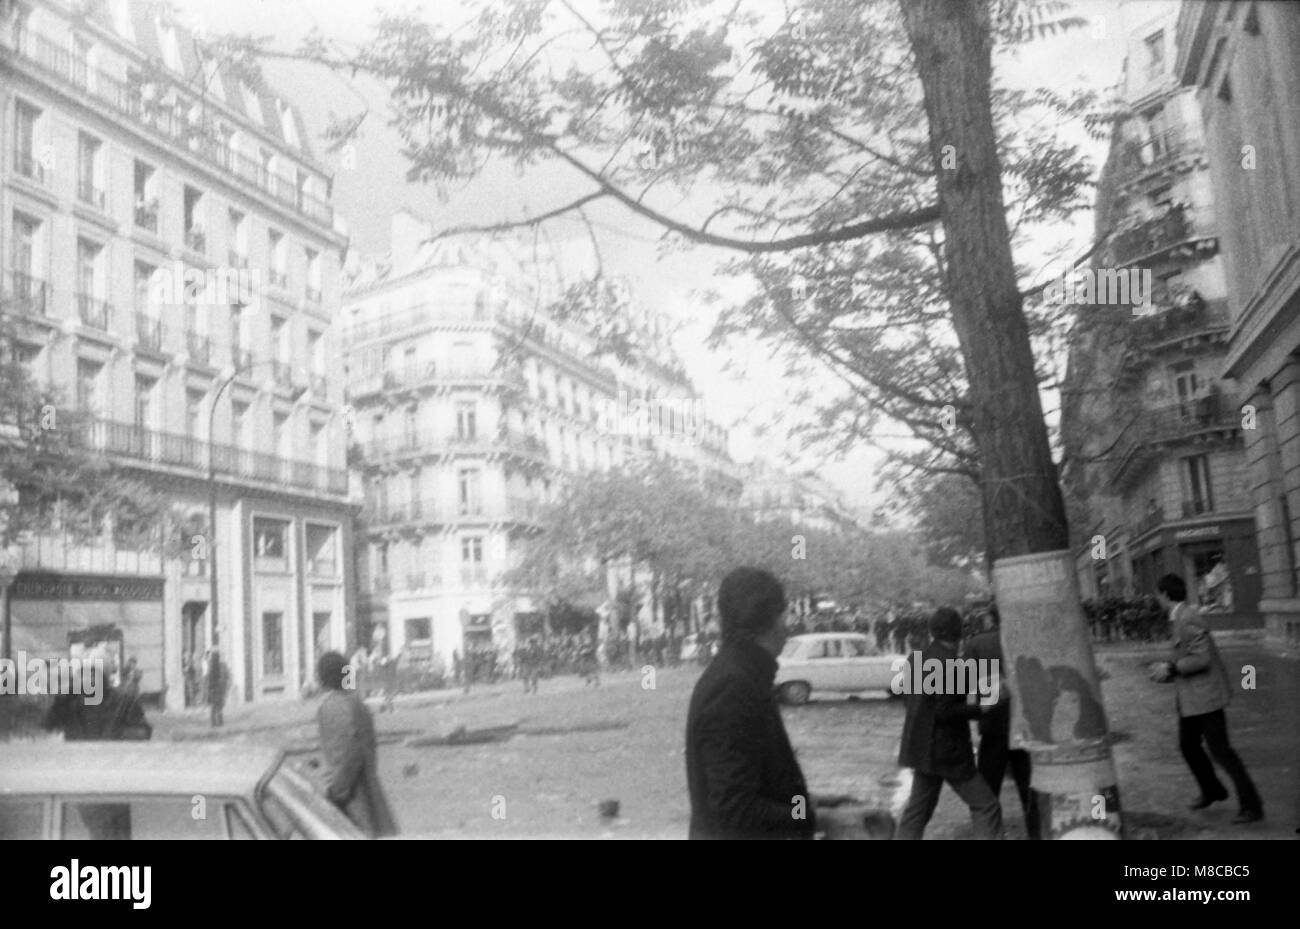 Philippe Gras / Le Pictorium -  May 68 -  1968  -  France / Ile-de-France (region) / Paris  -  Clashes Saint Germain Boulevard between protesters and police Stock Photo